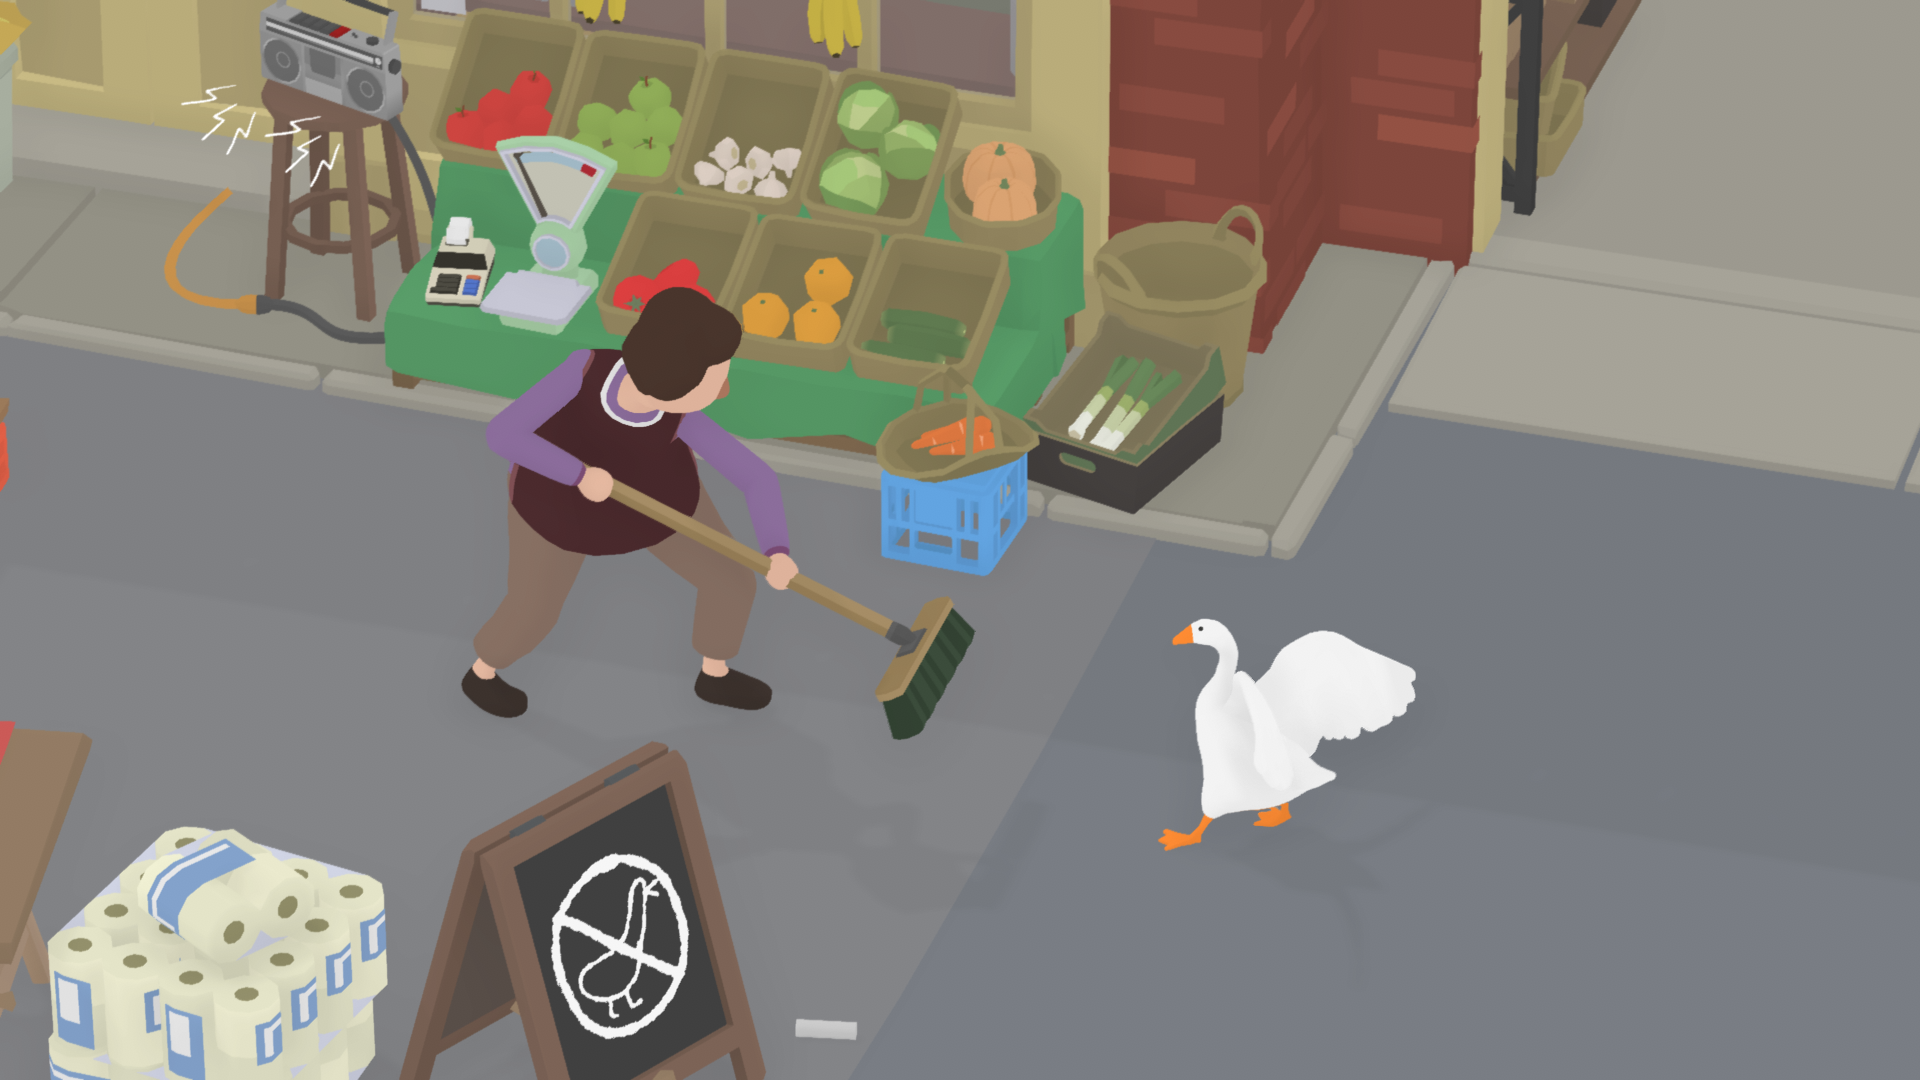 untitled goose game sale